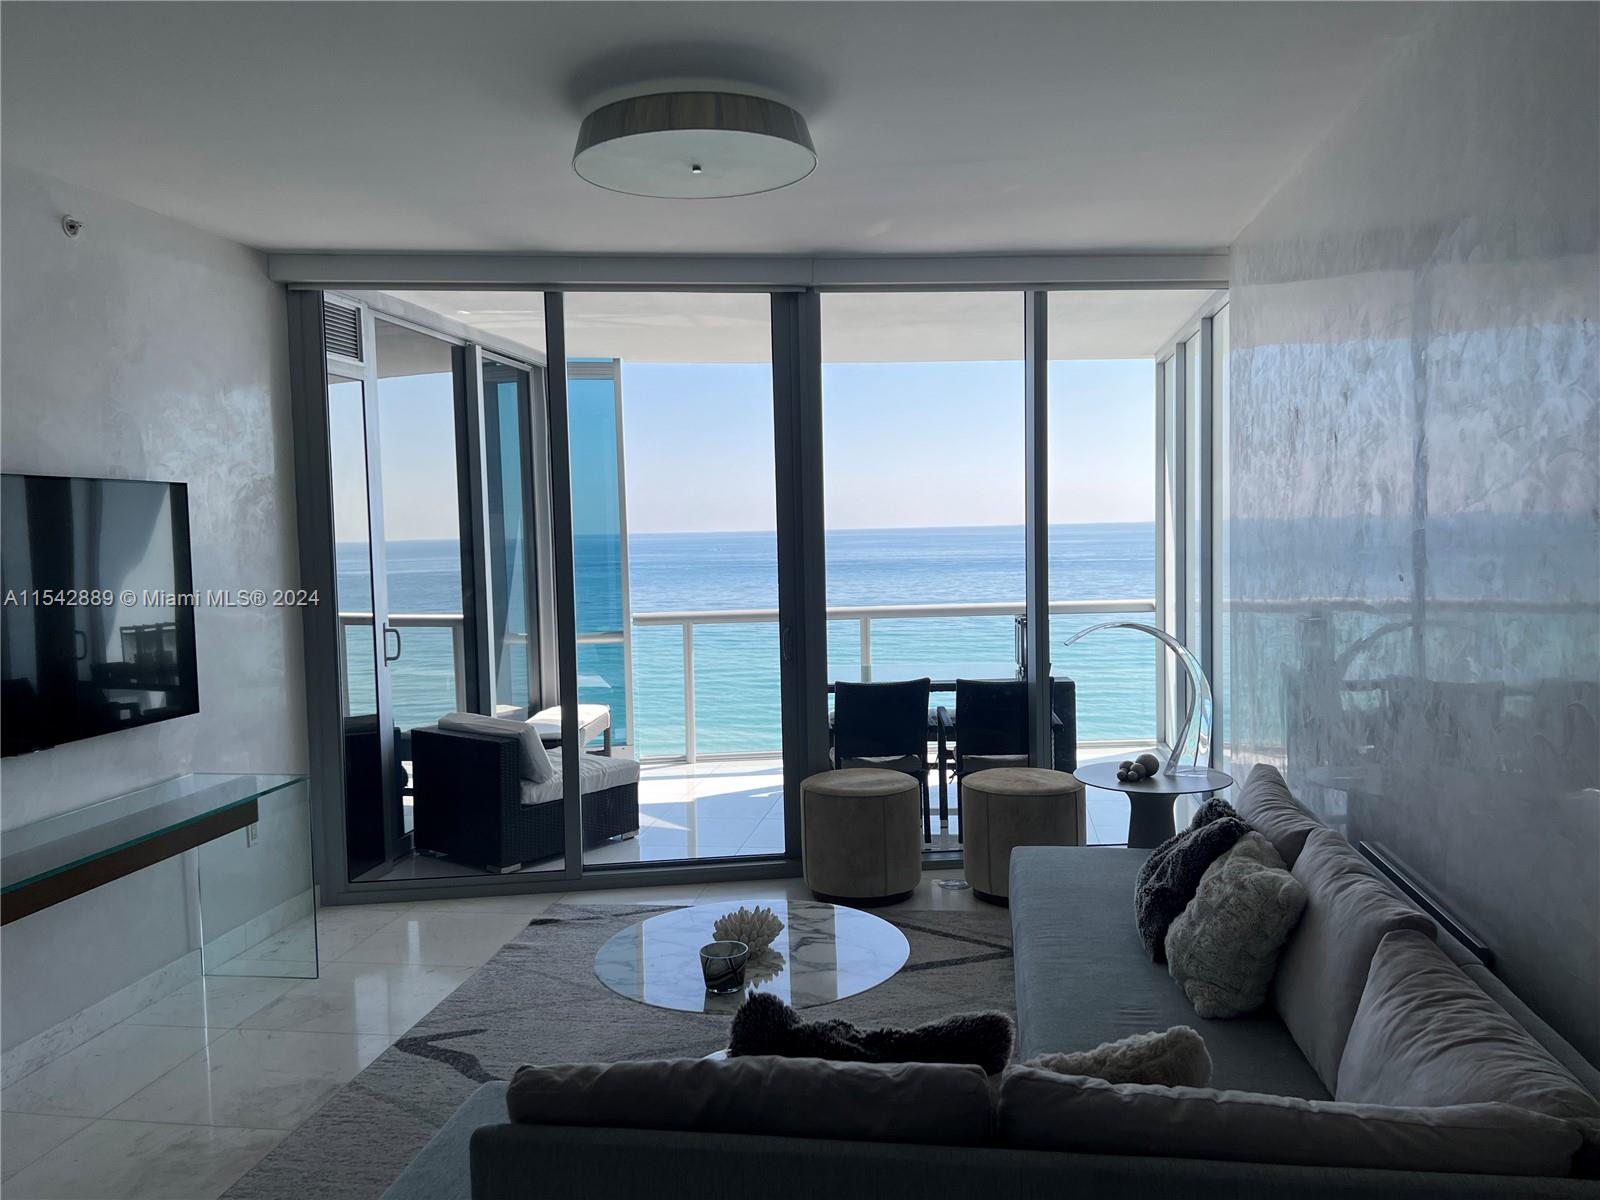 As you enter this apt, your eyes are immediately drawn to the stunning panoramic view of the sea. The floor-to-ceiling windows allow natural light to flood the room, illuminating the elegant décor providing a sense of spaciousness. Painted in pearl grey, creates a calming atmosphere which the L-shaped sofa with soft pillows invites you to sit and relax . A round marble coffee table sits in the center of the room, adding a touch of sophistication A crystal media console is situated against one wall, framing the base of a flat-screen TV. Windows are dressed with motorized sheer white sunscreens, casting a warm and inviting glow over the room. Overall, whether lounging pool side or overlooking the sea, this condo offers a luxurious and comfortable retreat, a perfect place to call home.